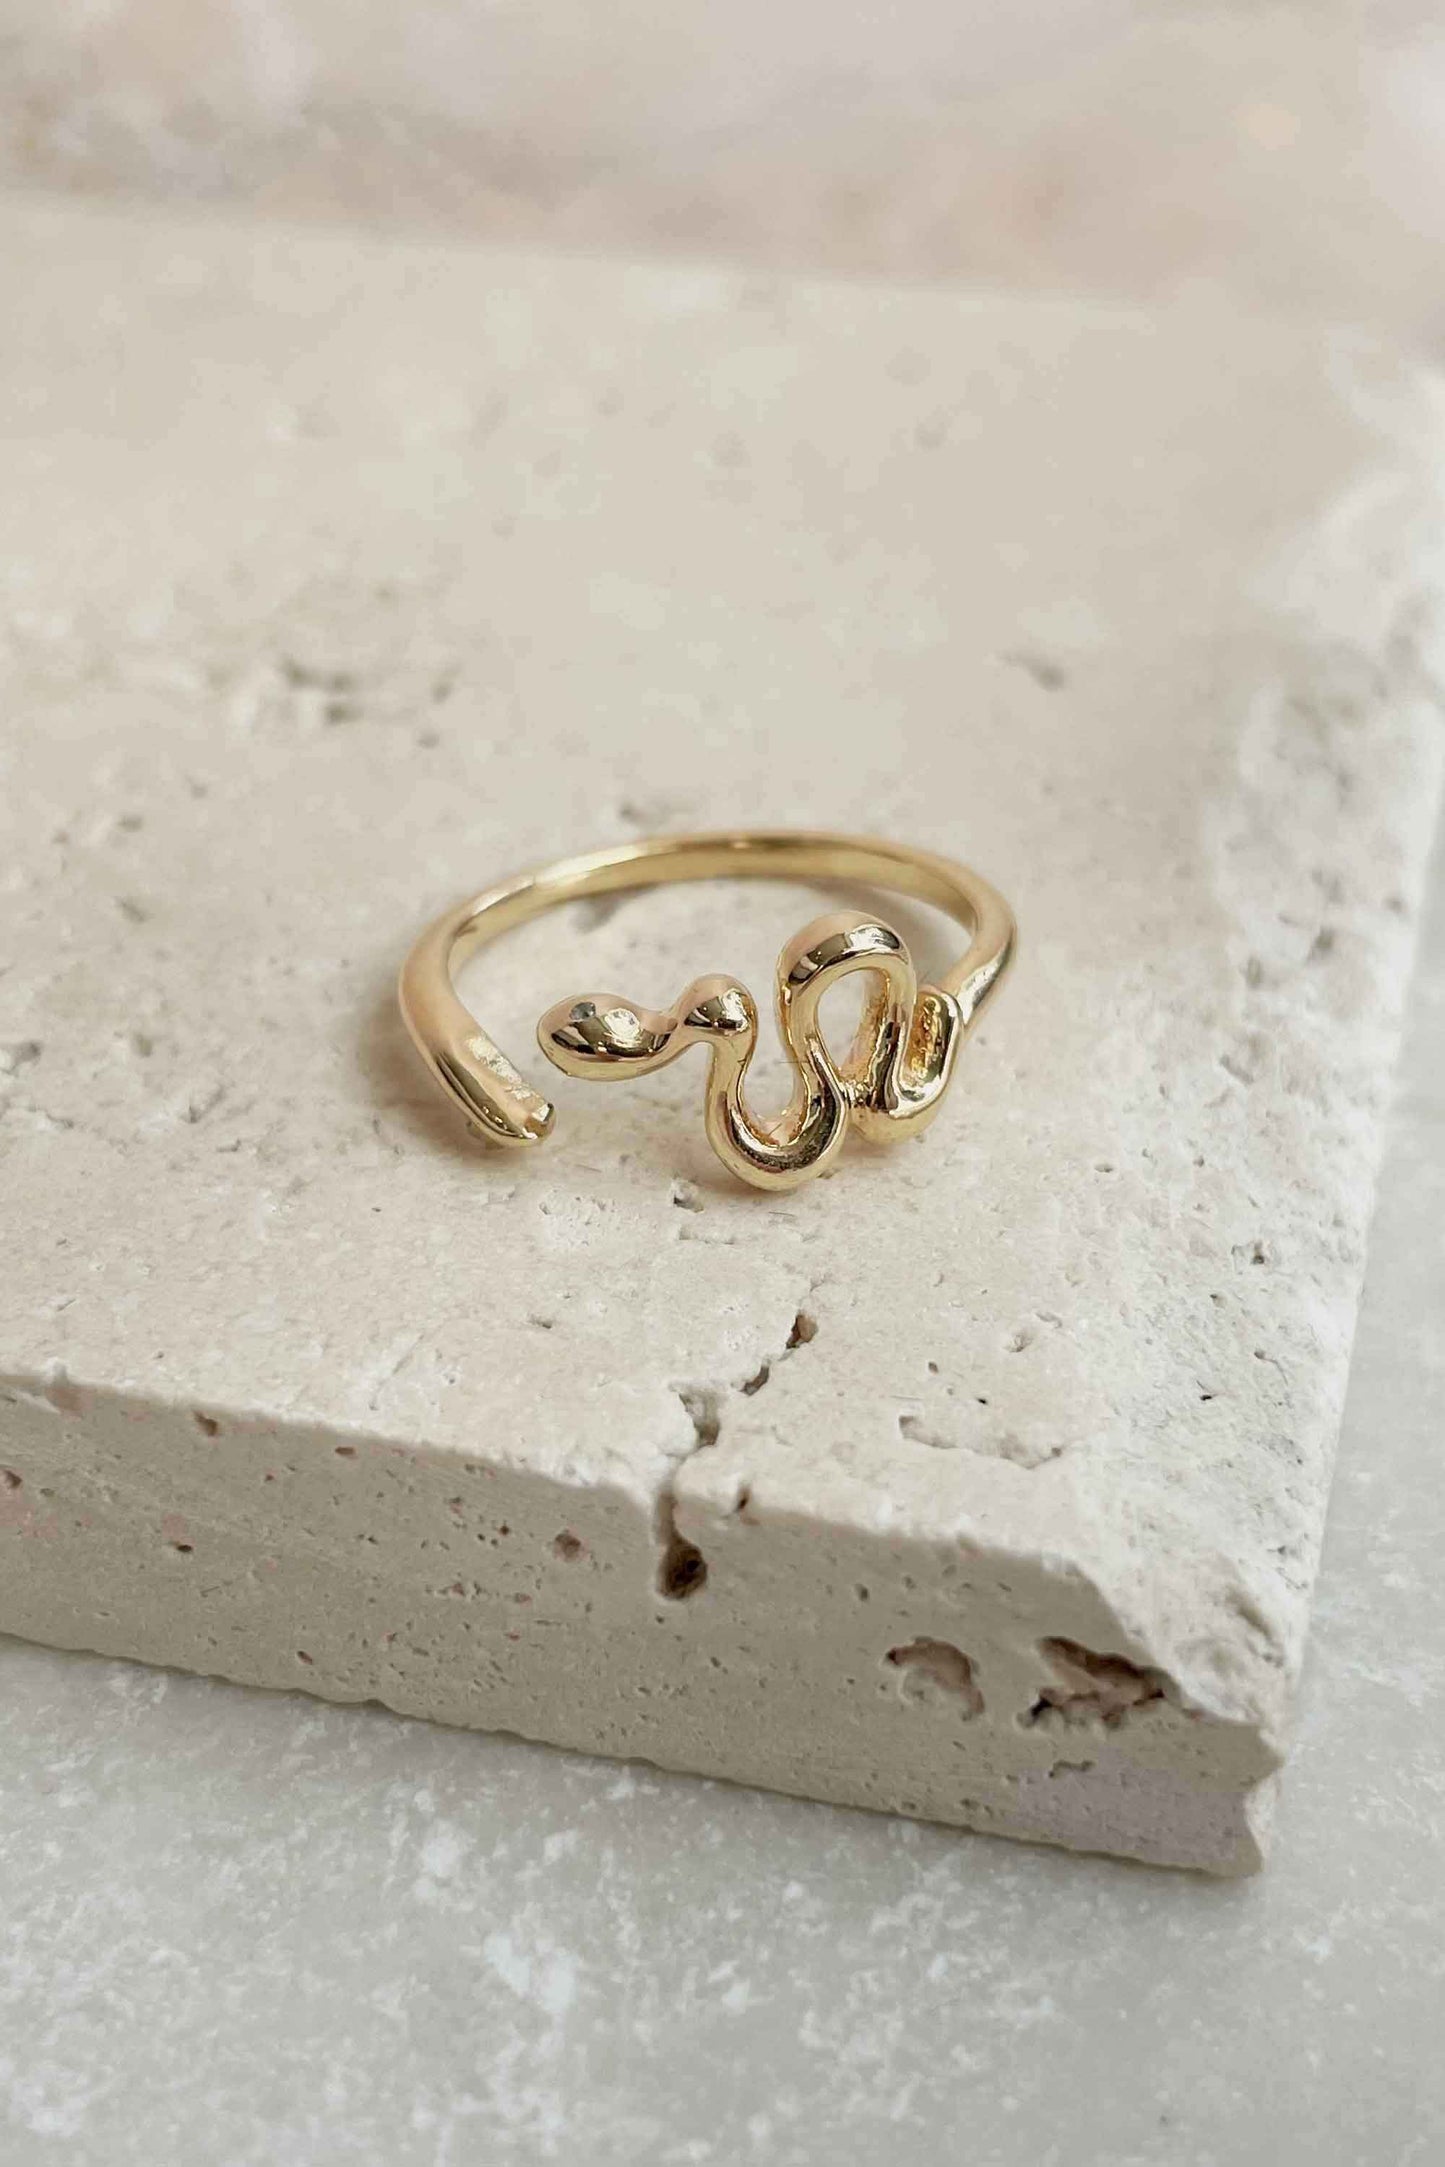 GOLD-ADJUSTABLE-STATEMENT-SNAKE-RING-CLOSE-FLAY-LAY